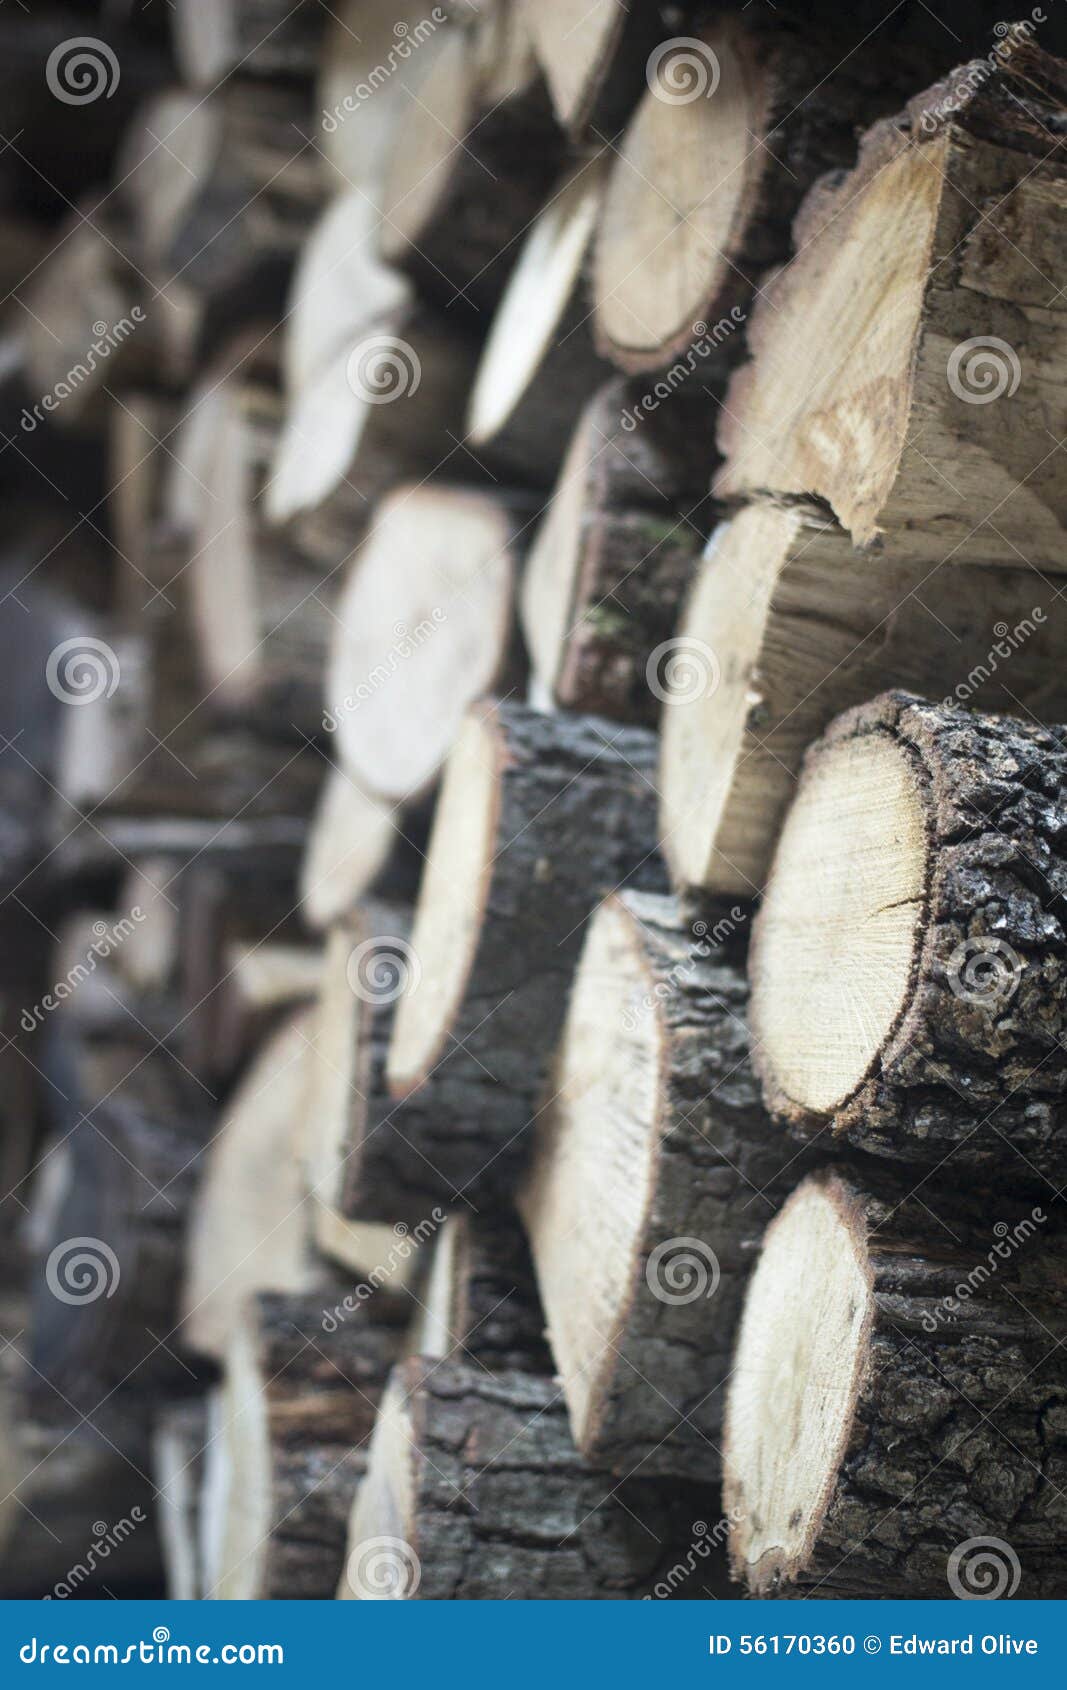 chopped firewood for house fireplace